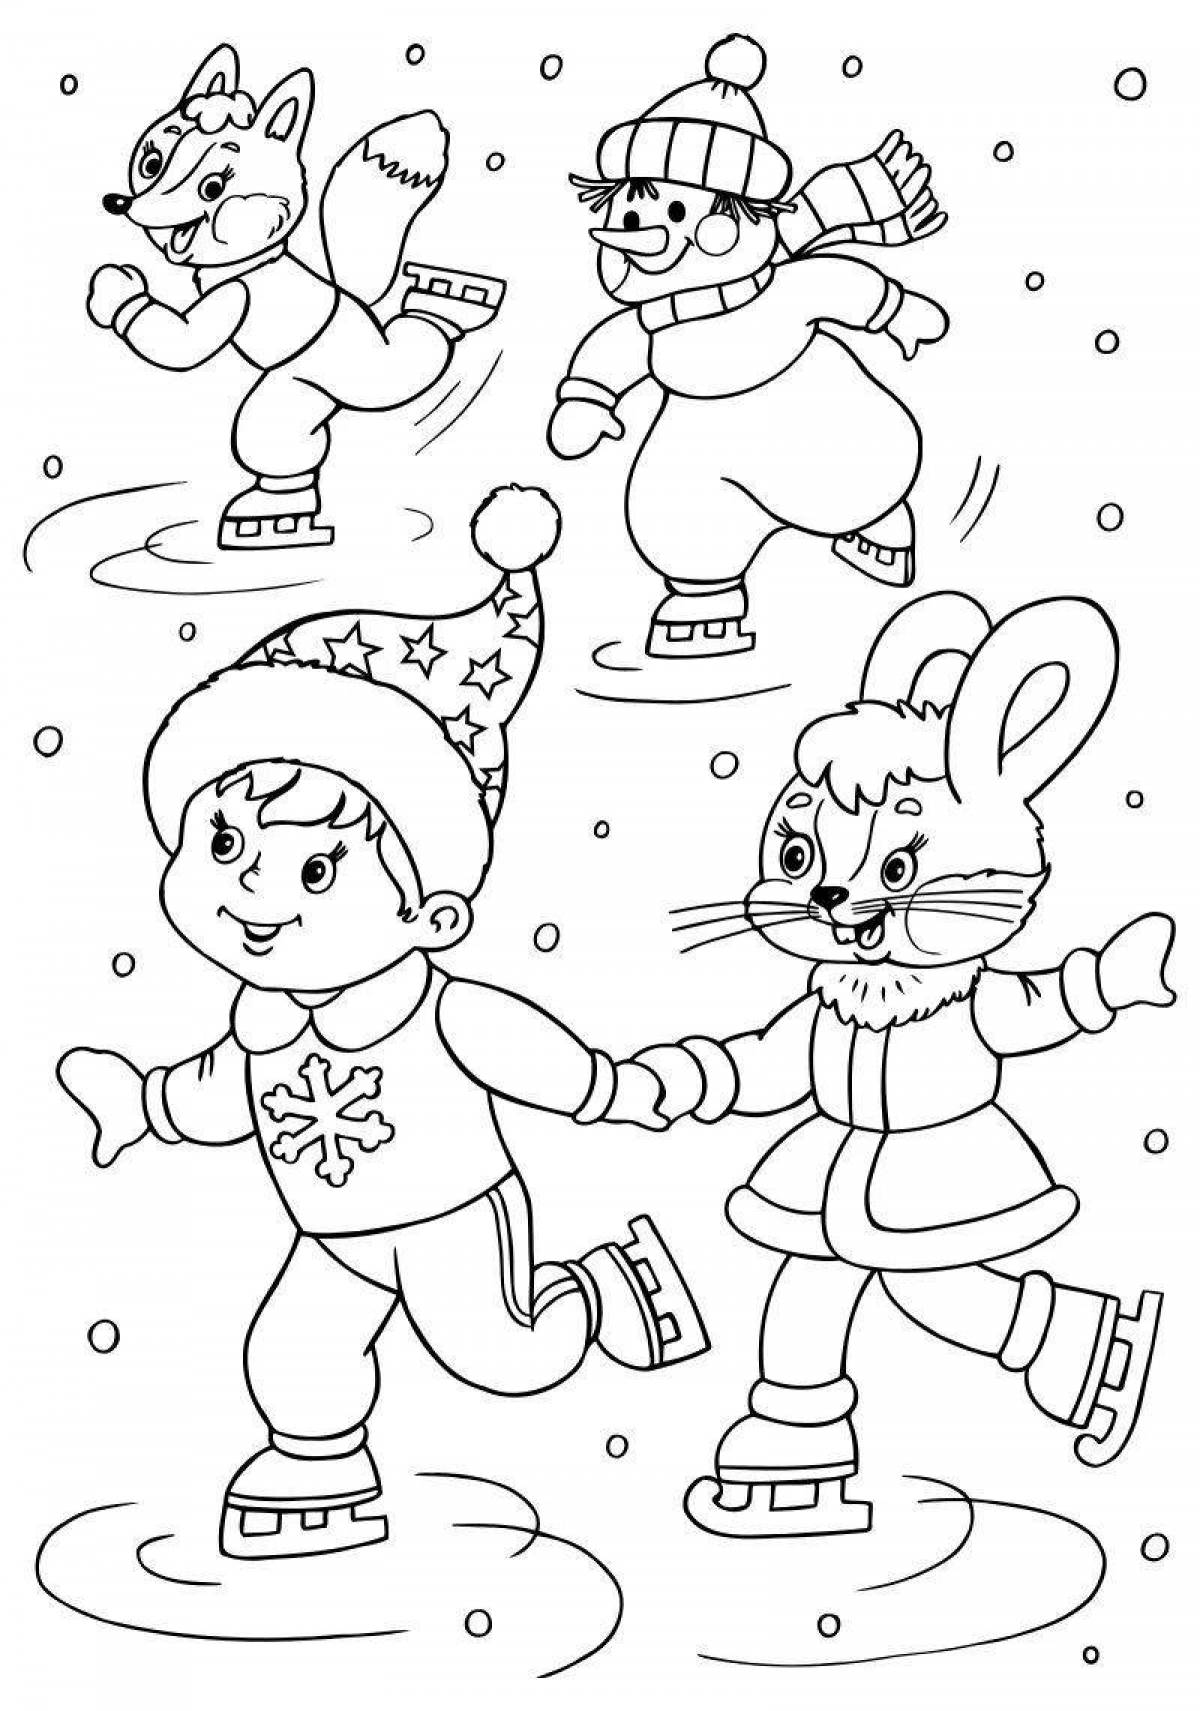 Bright 5 year old winter coloring book